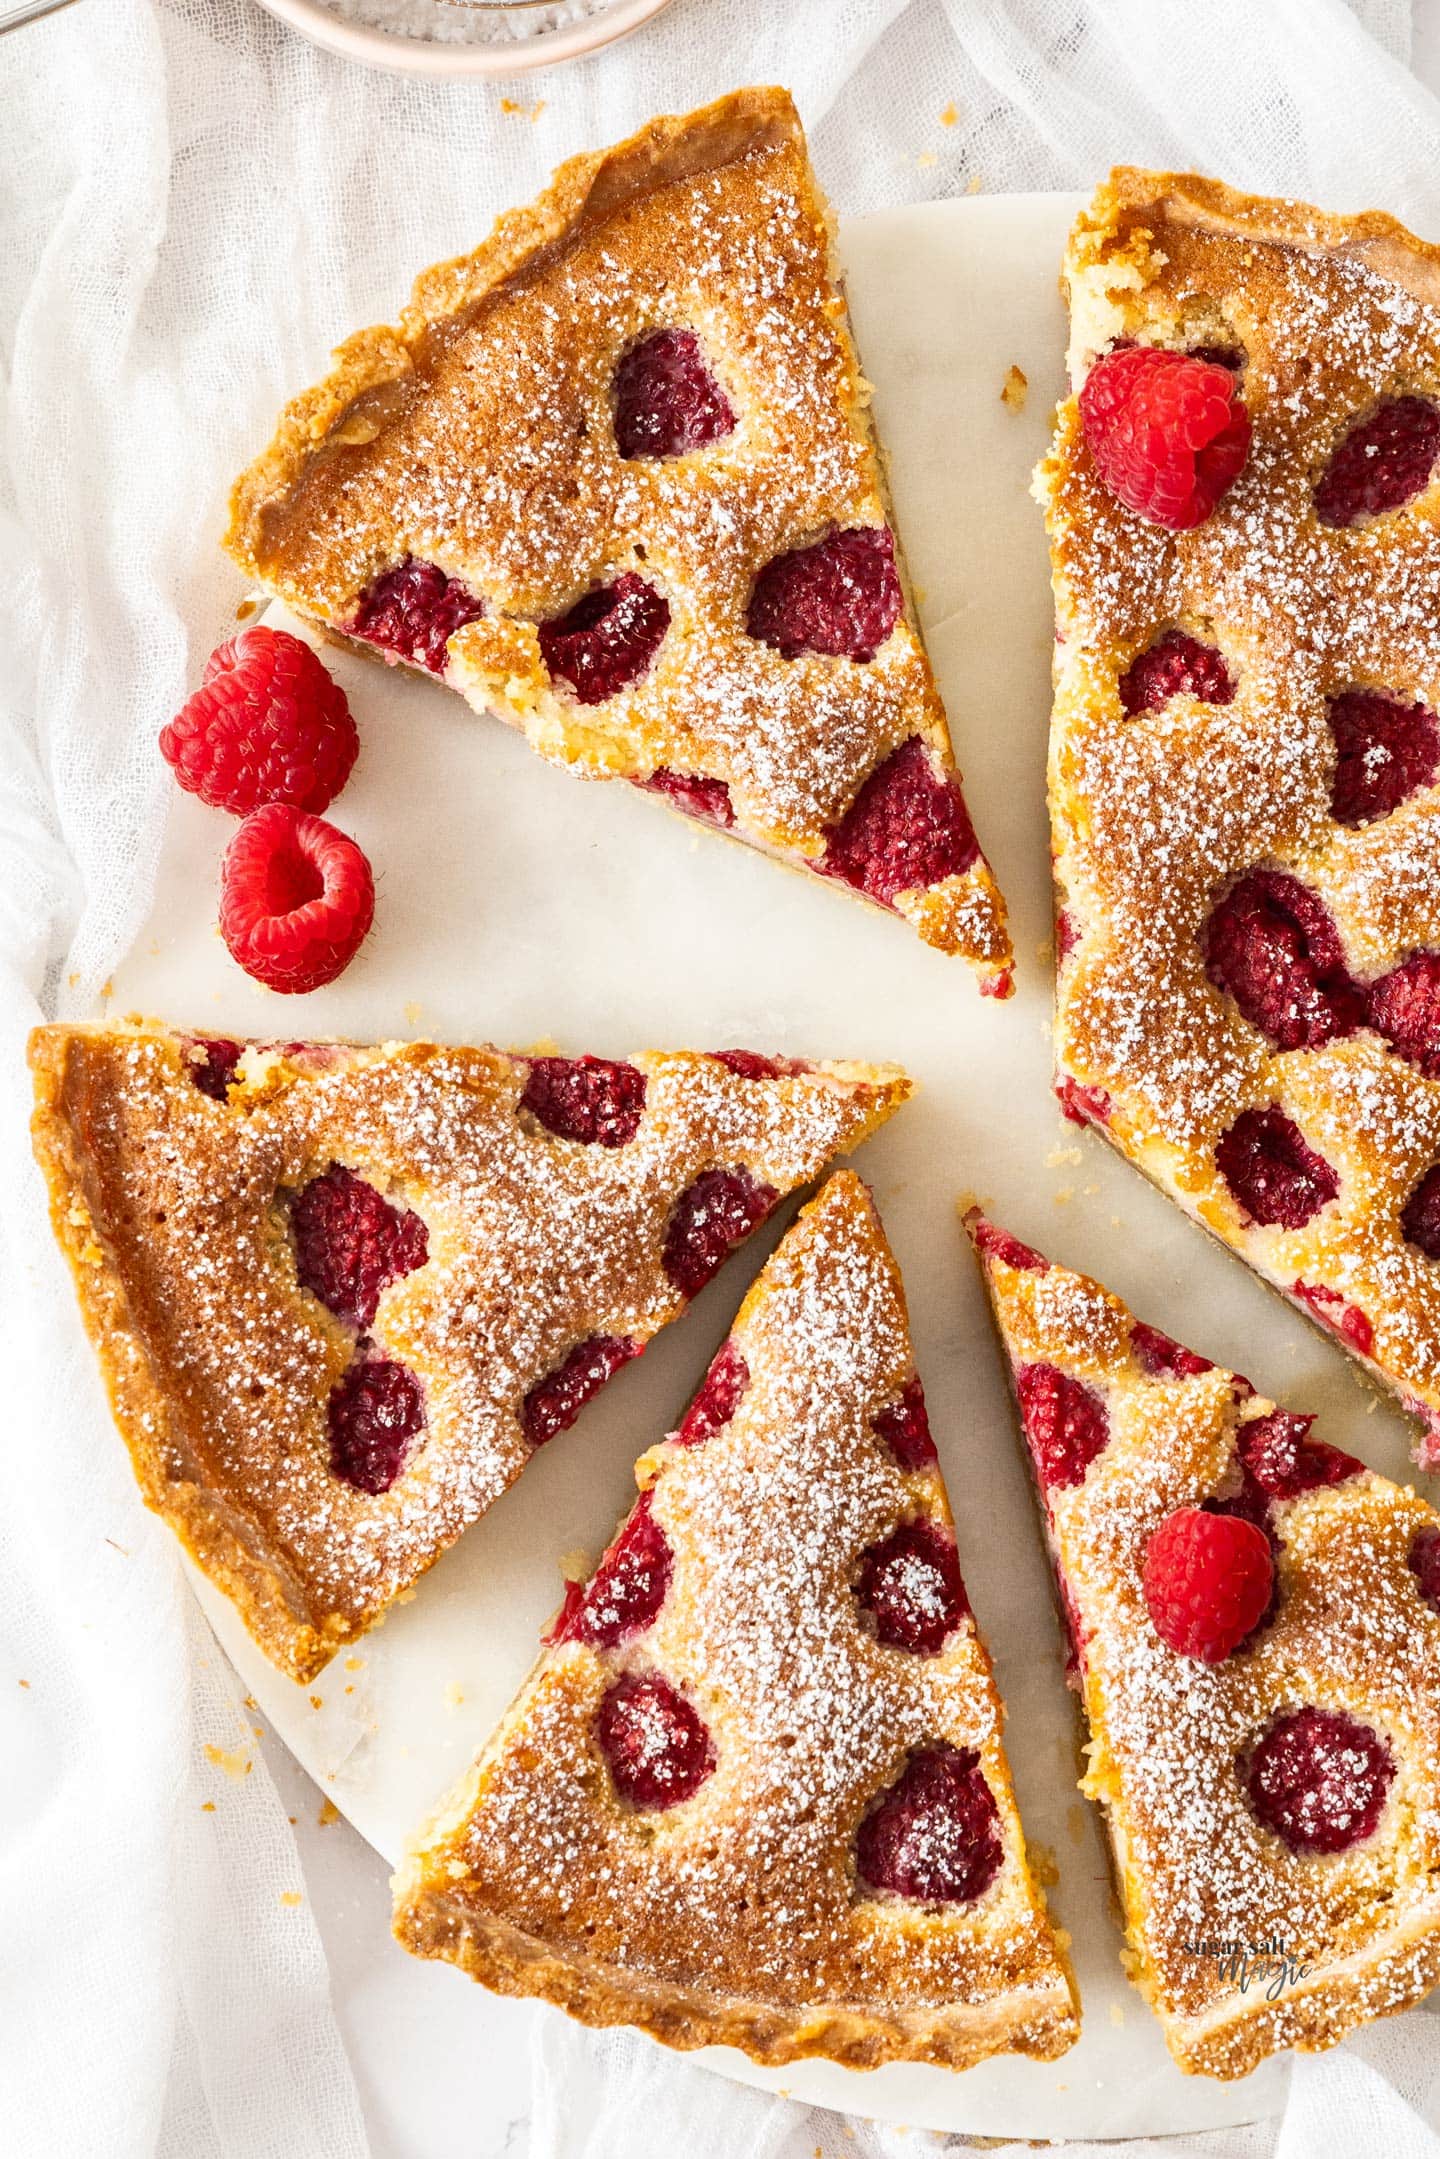 Closeup downwards view of 4 slices of raspberry frangipane tart.